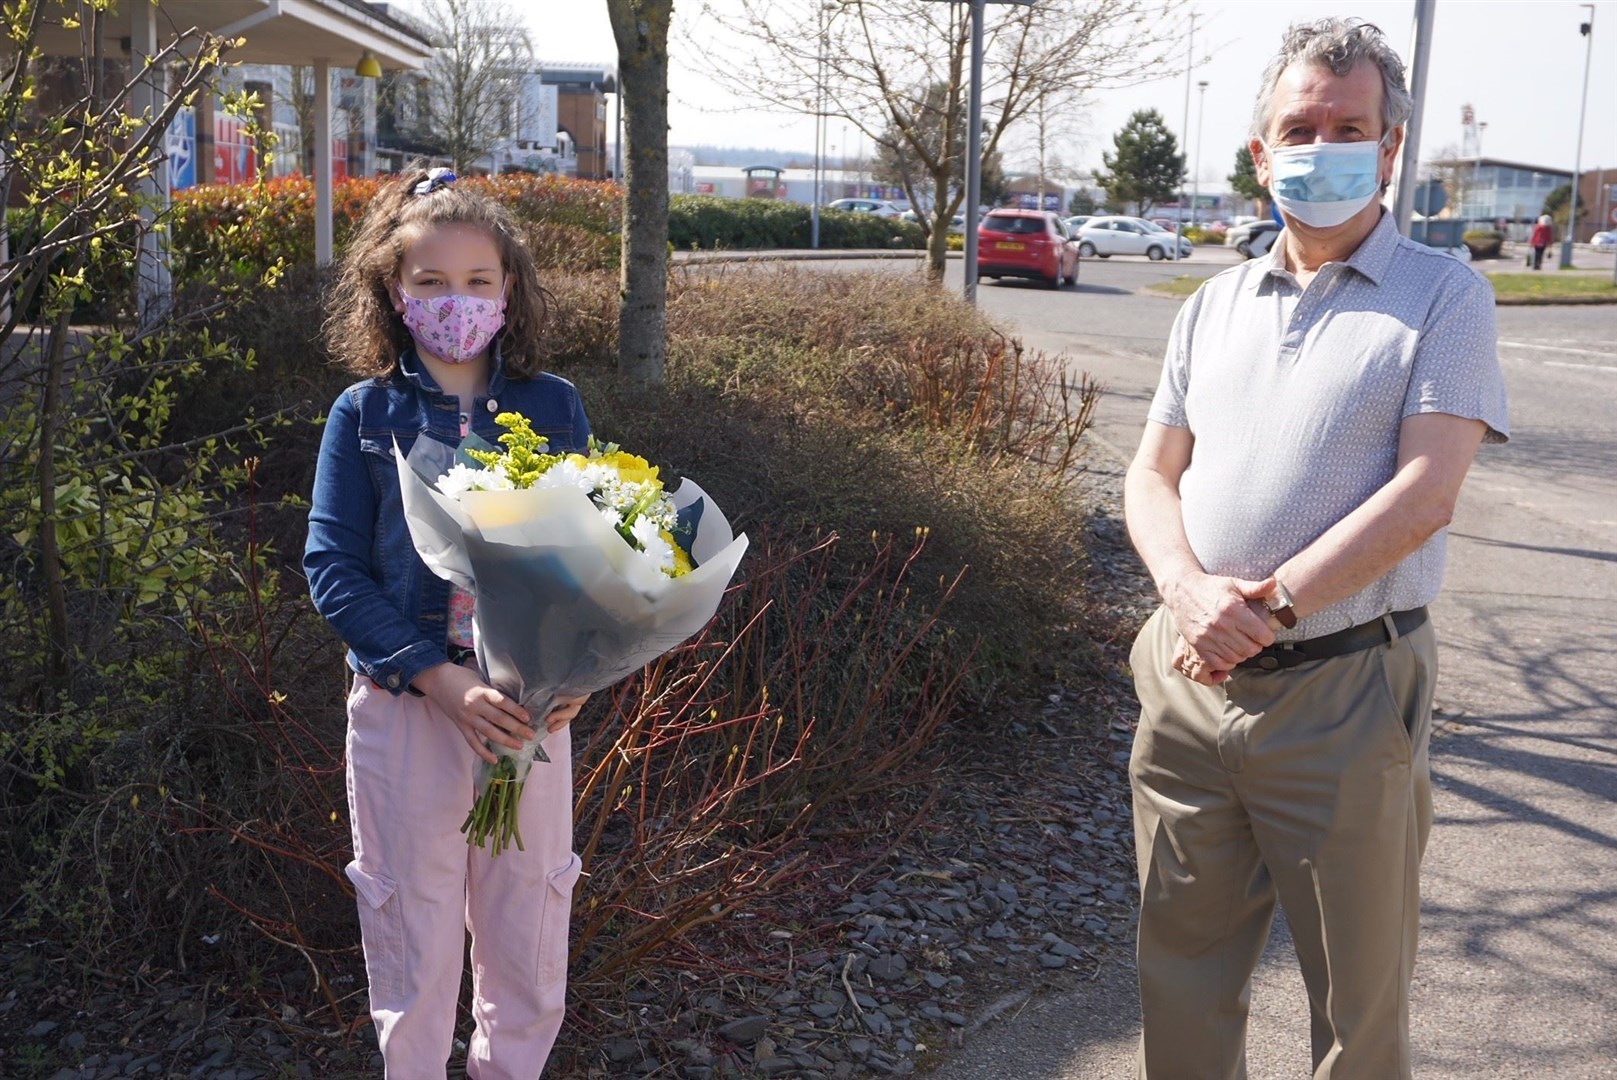 Former MSP David Stewart presented Chloe MacAllister with flowers as thanks for her efforts to educate others about her condition.